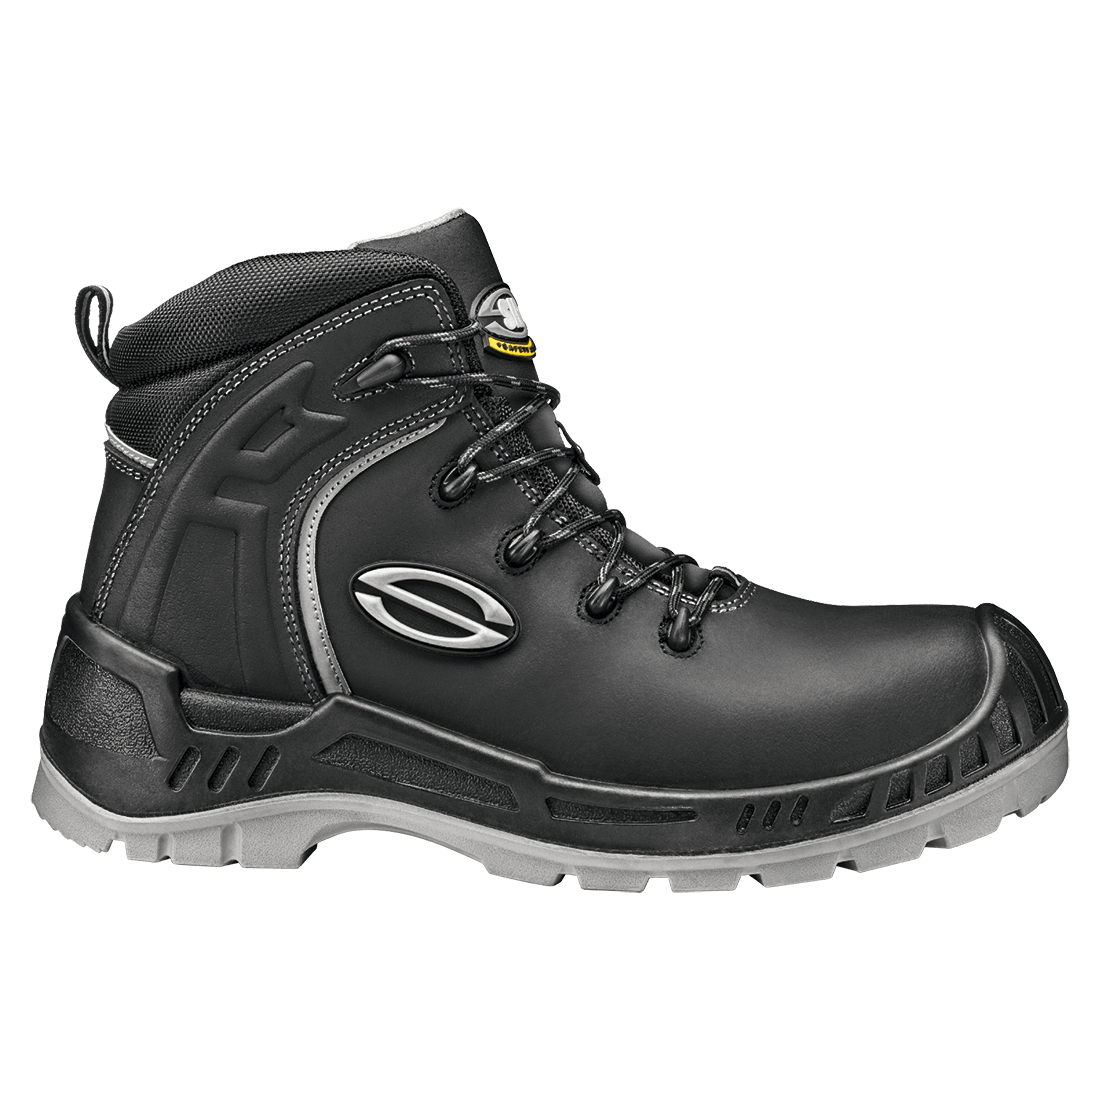 OVERCAP MAX SAFETY SHOE